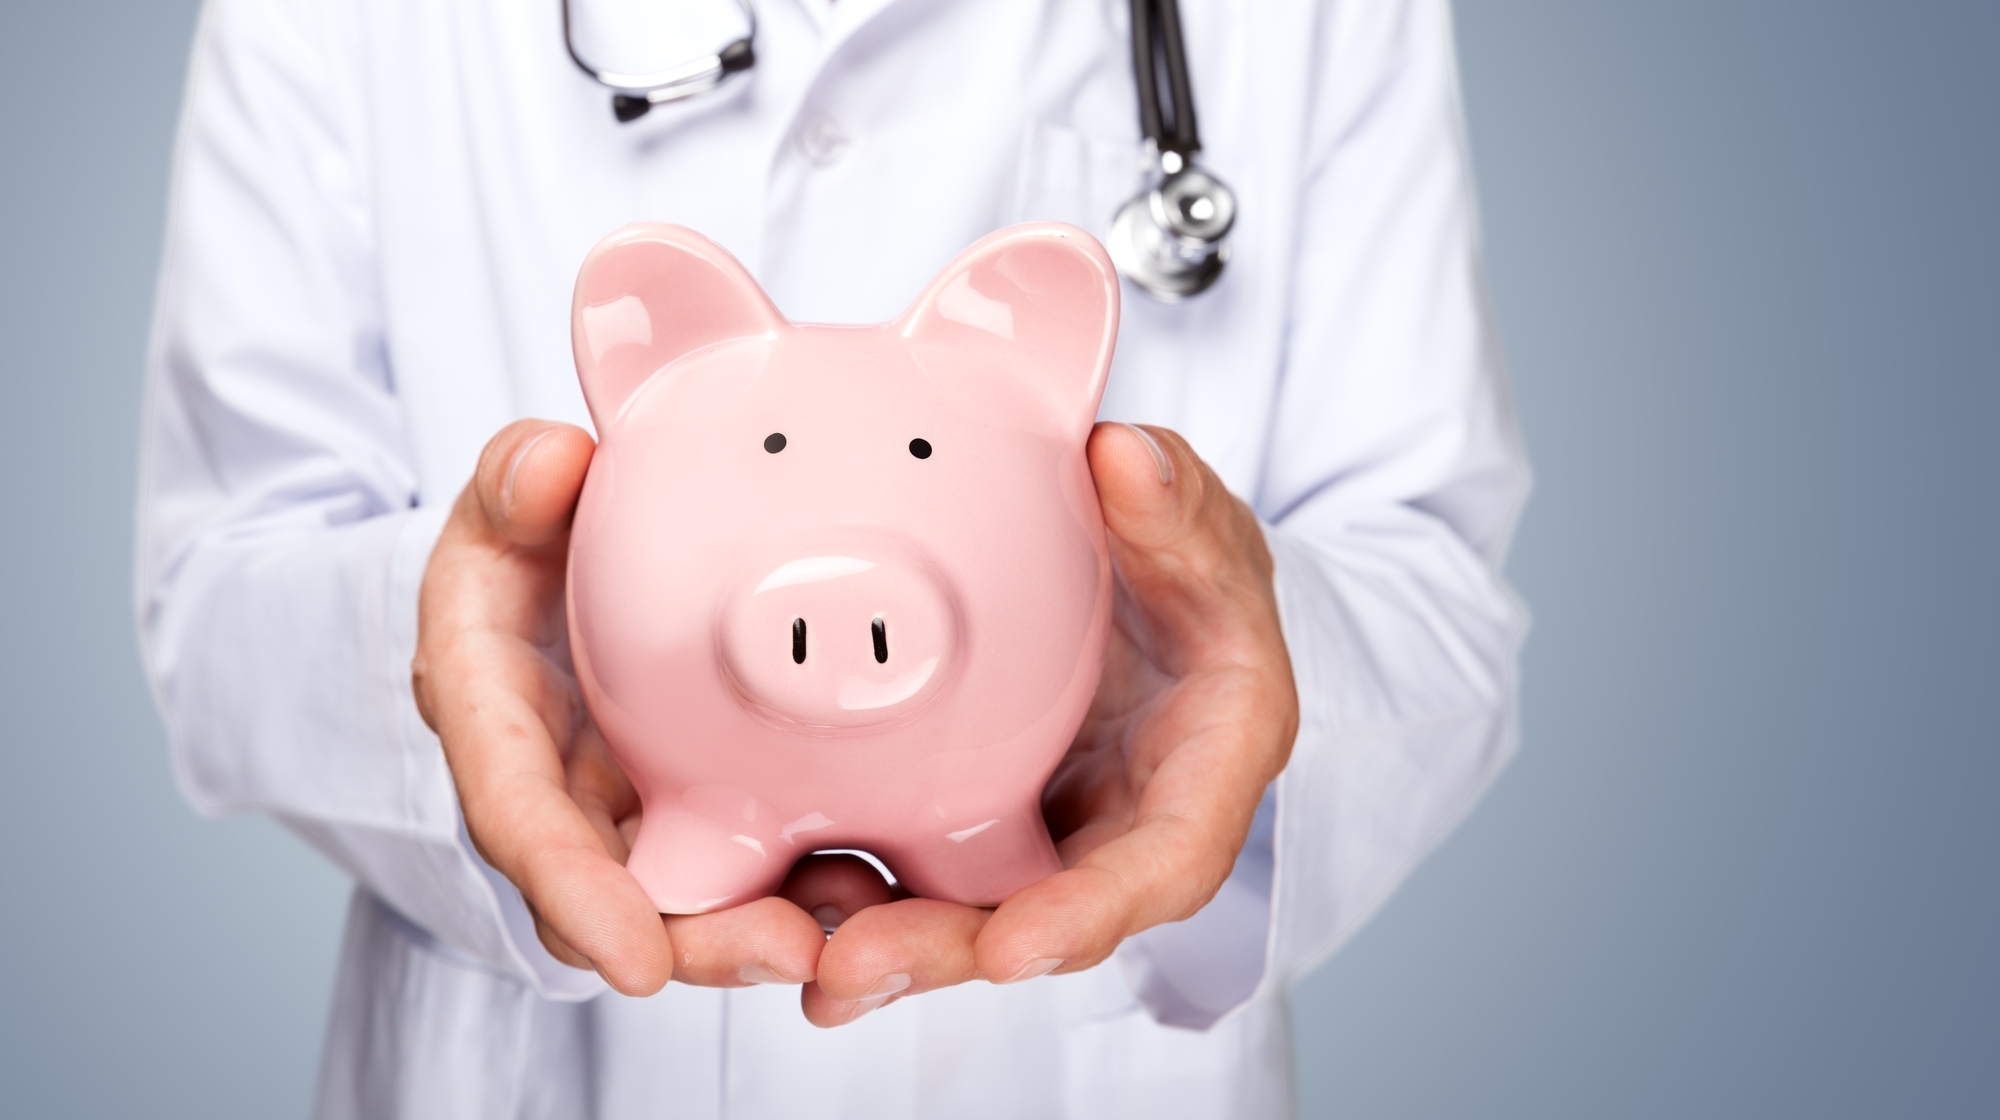 Managing Your Finances Through Med School and Beyond